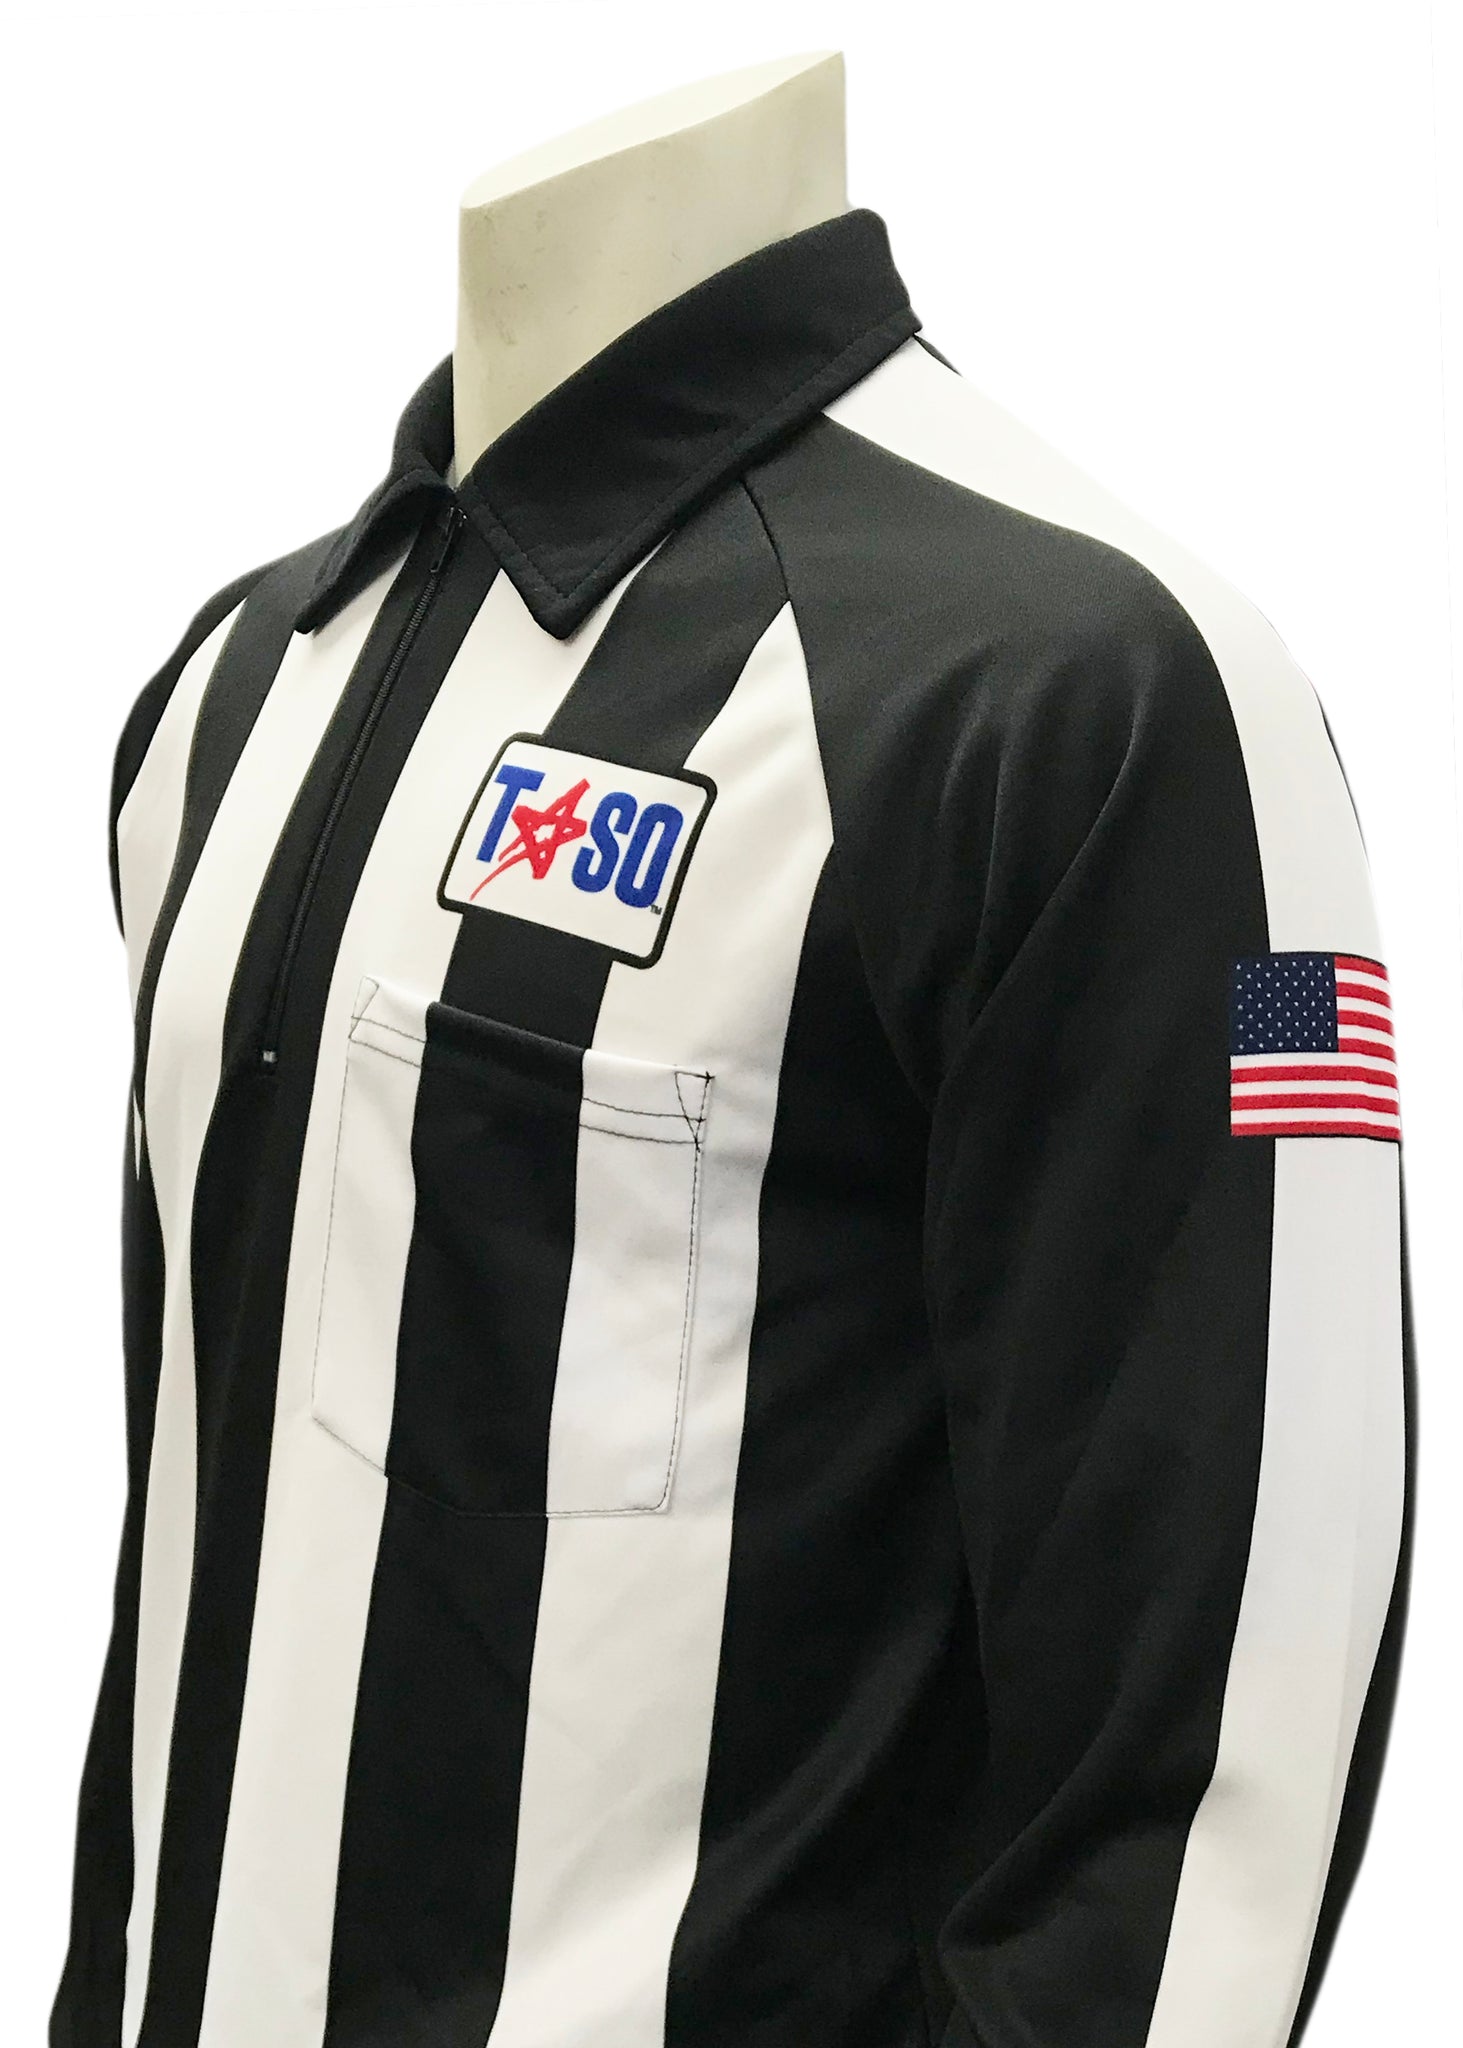 USA108TASO-PL - Smitty "Made in USA" -  "TASO" Long Sleeve Football Shirt w/Position Letter